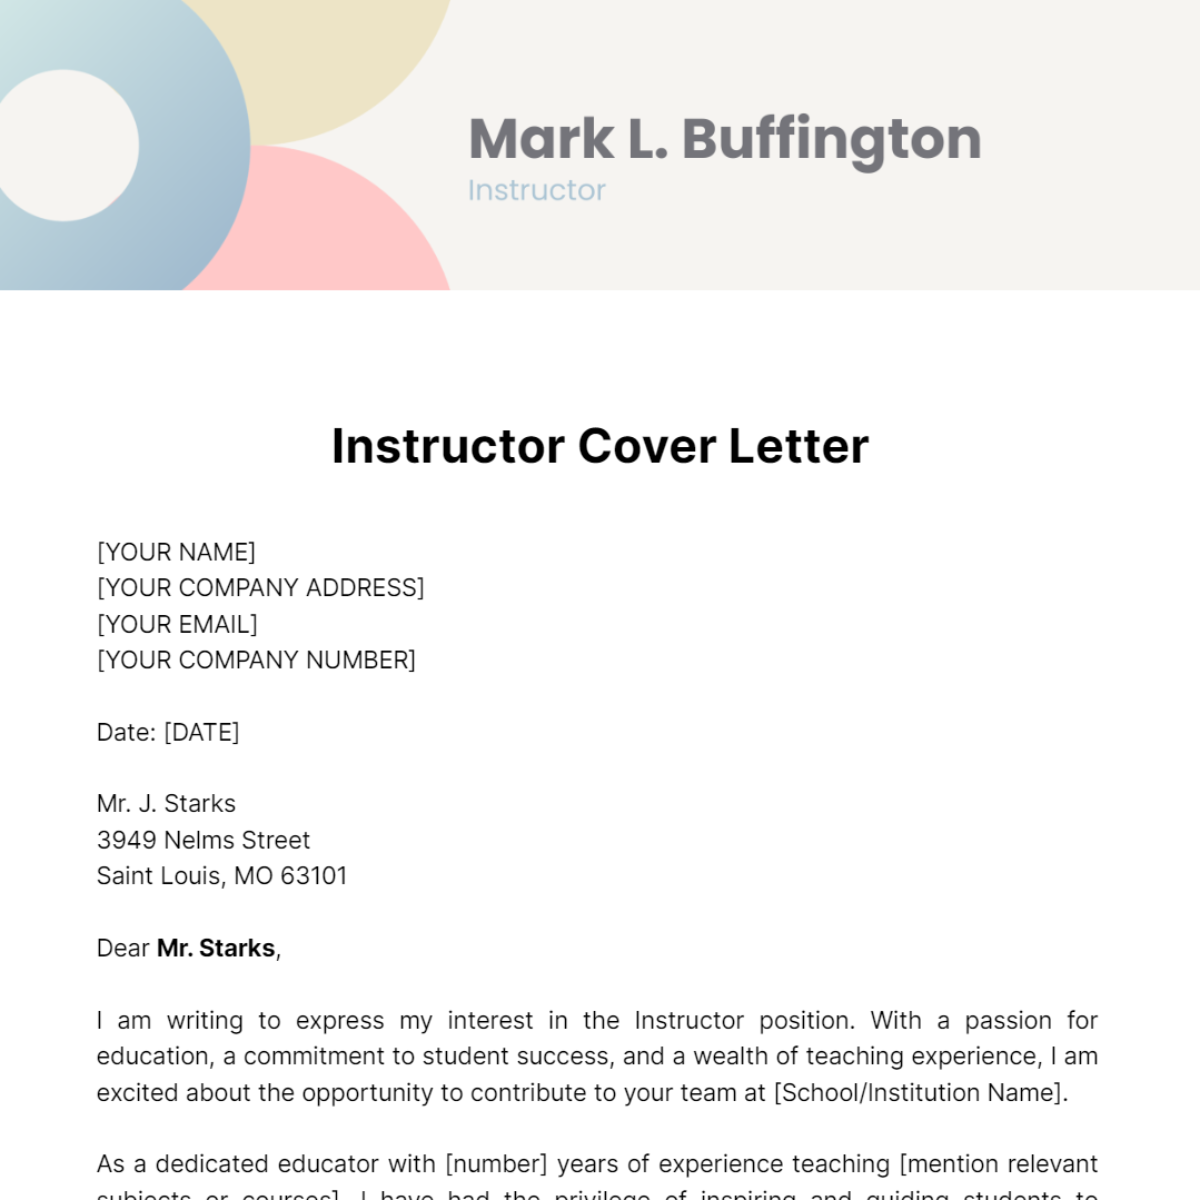 Instructor Cover Letter Template